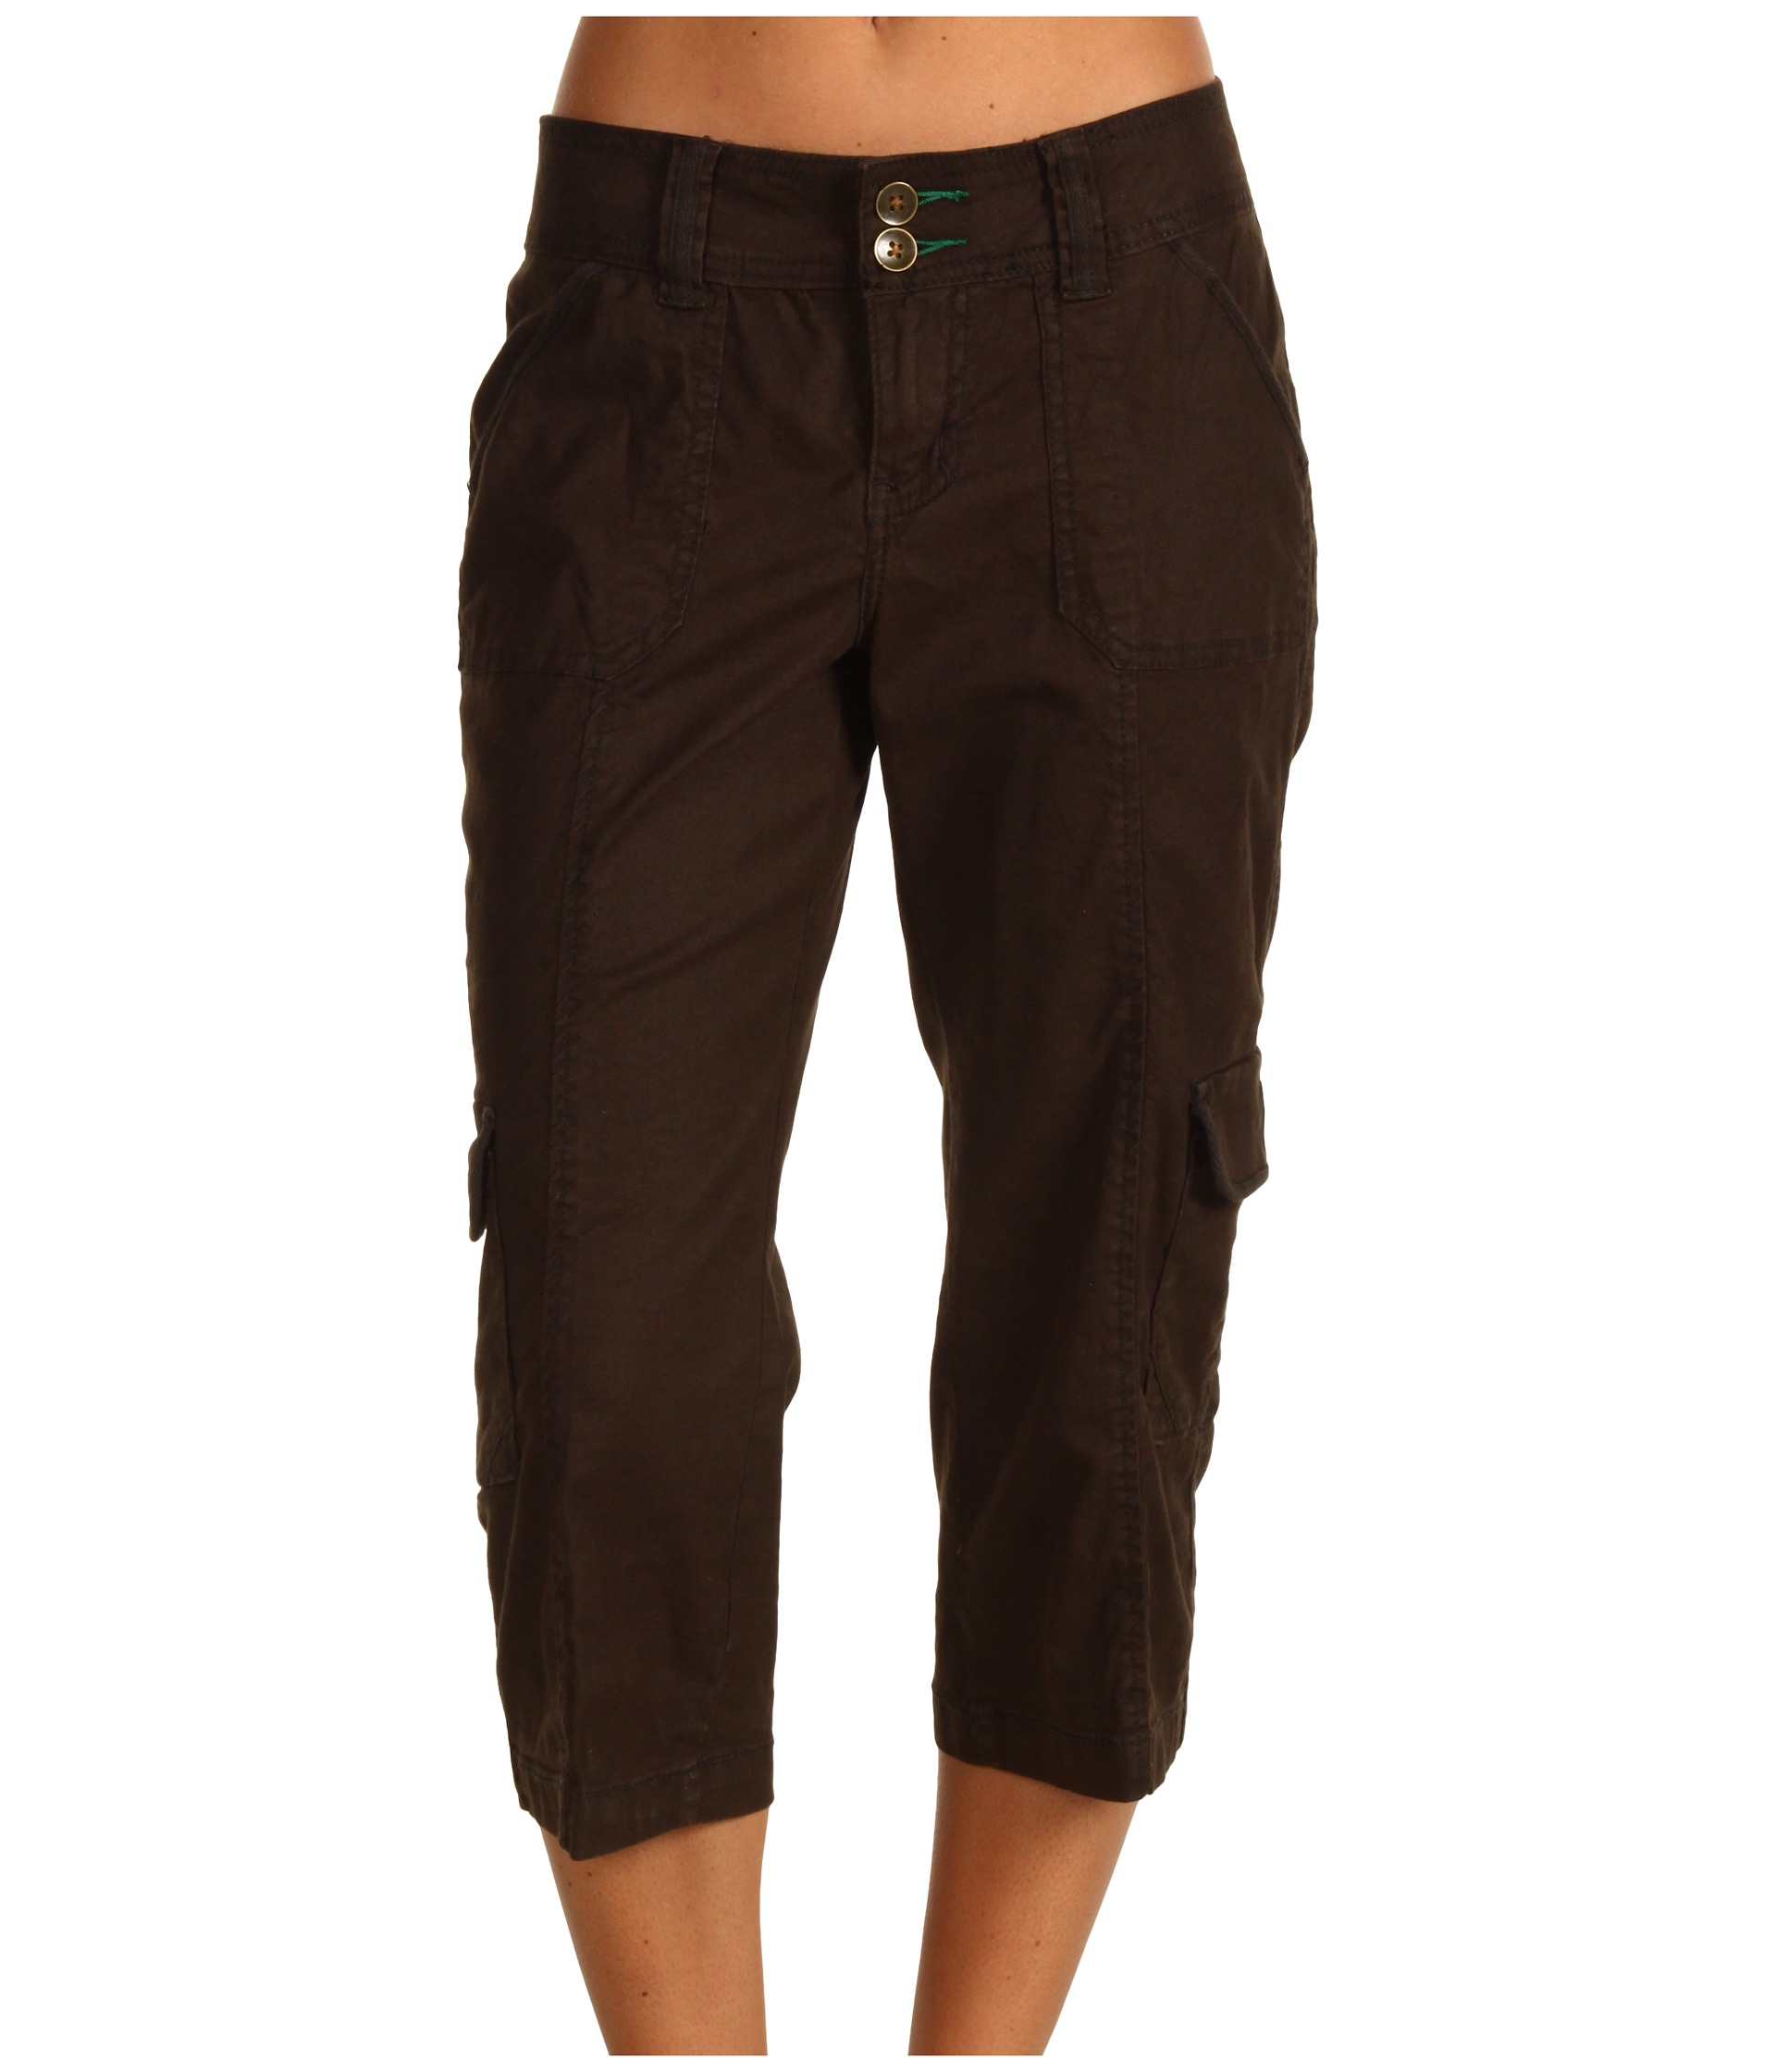 cargo pants and Clothing” 1